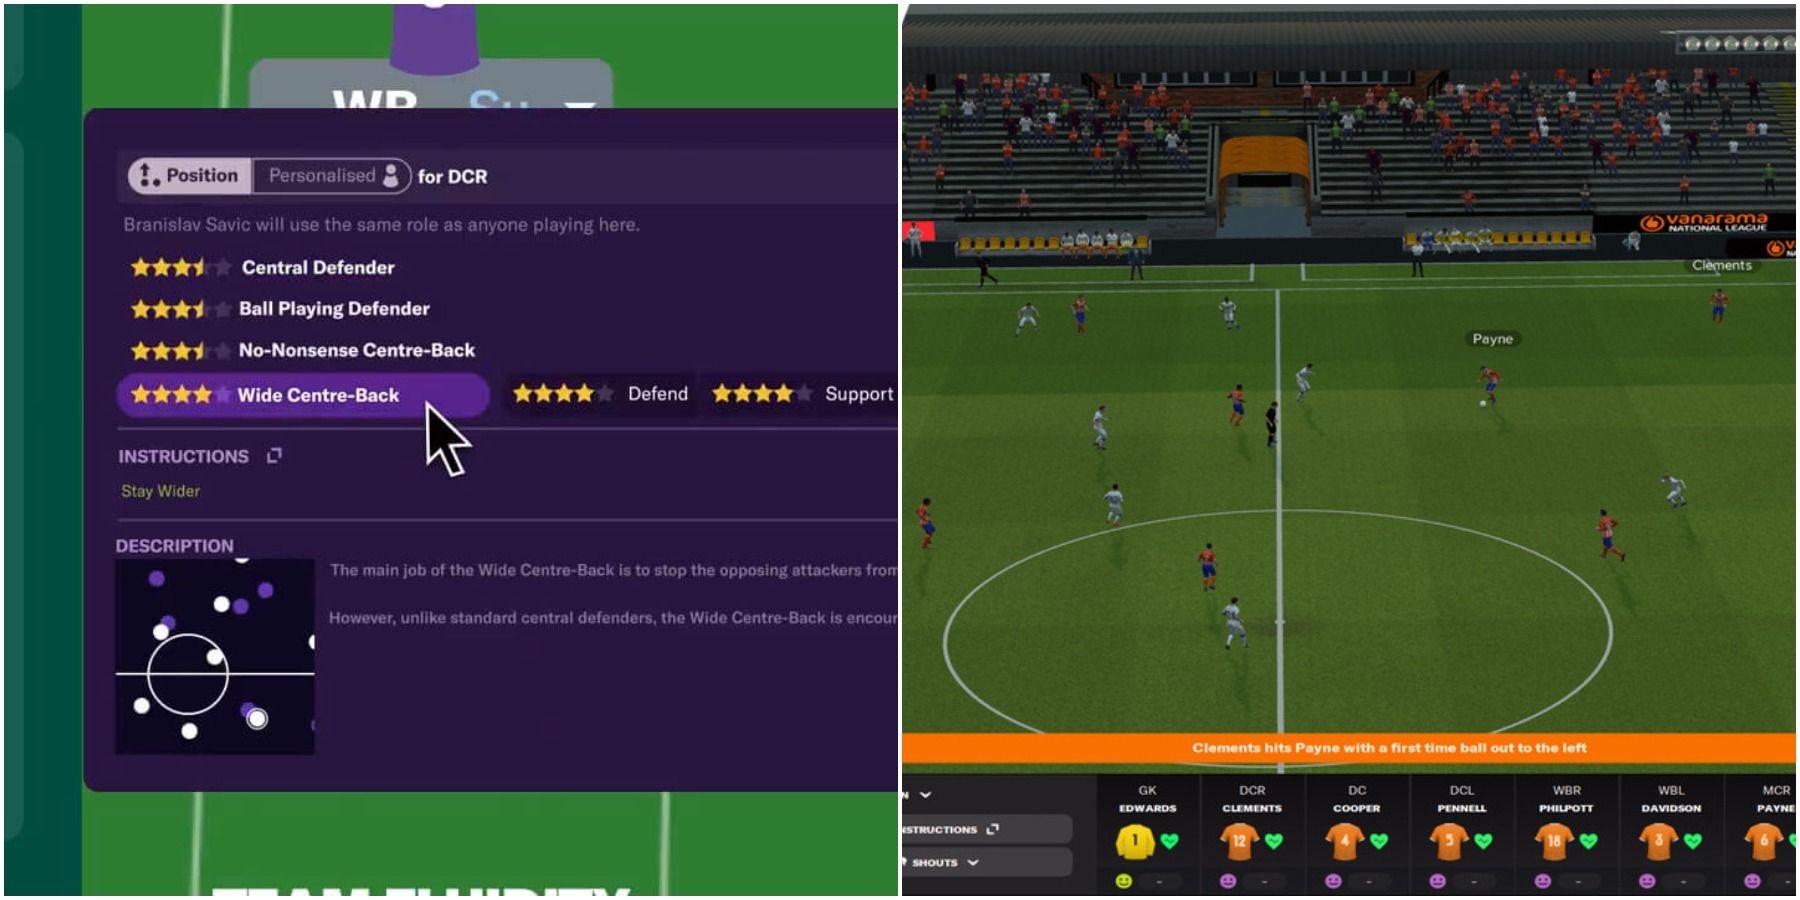 Football Manager 2022 OUT NOW